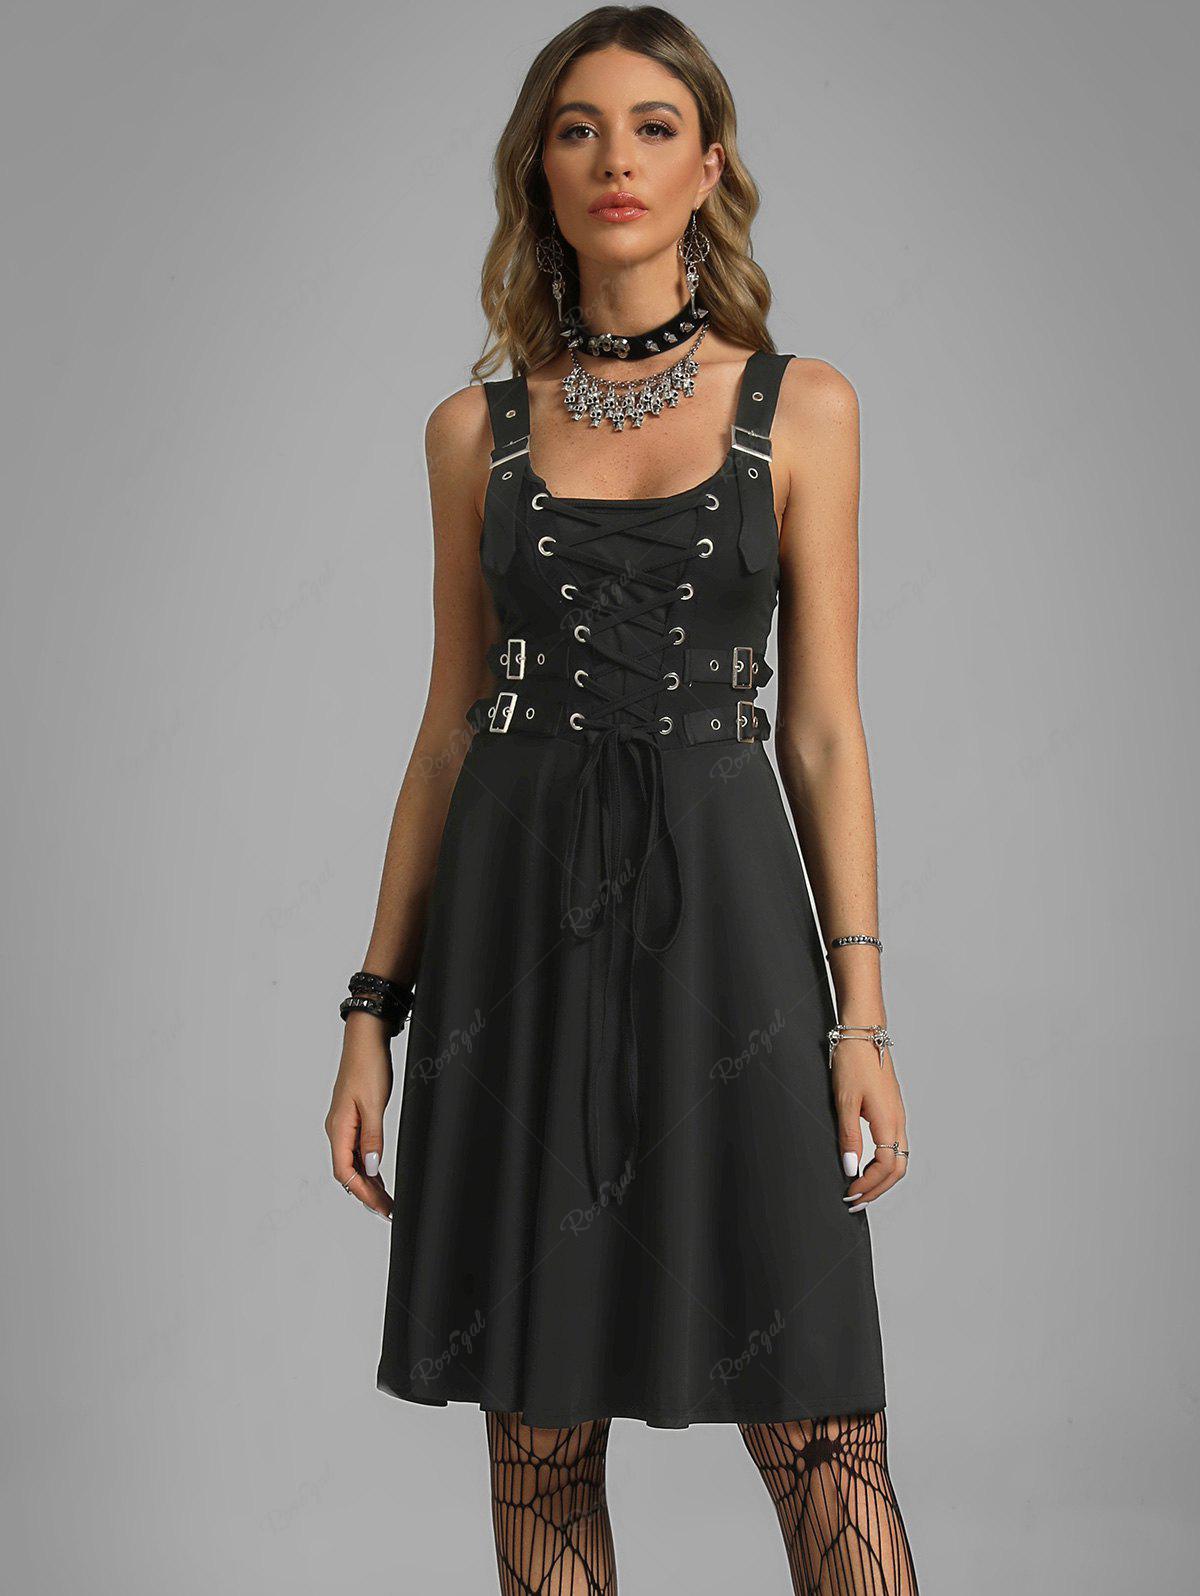 💗Erika Loves💗 Plus Size Lace Up Buckles A Line Sleeveless Gothic Dress